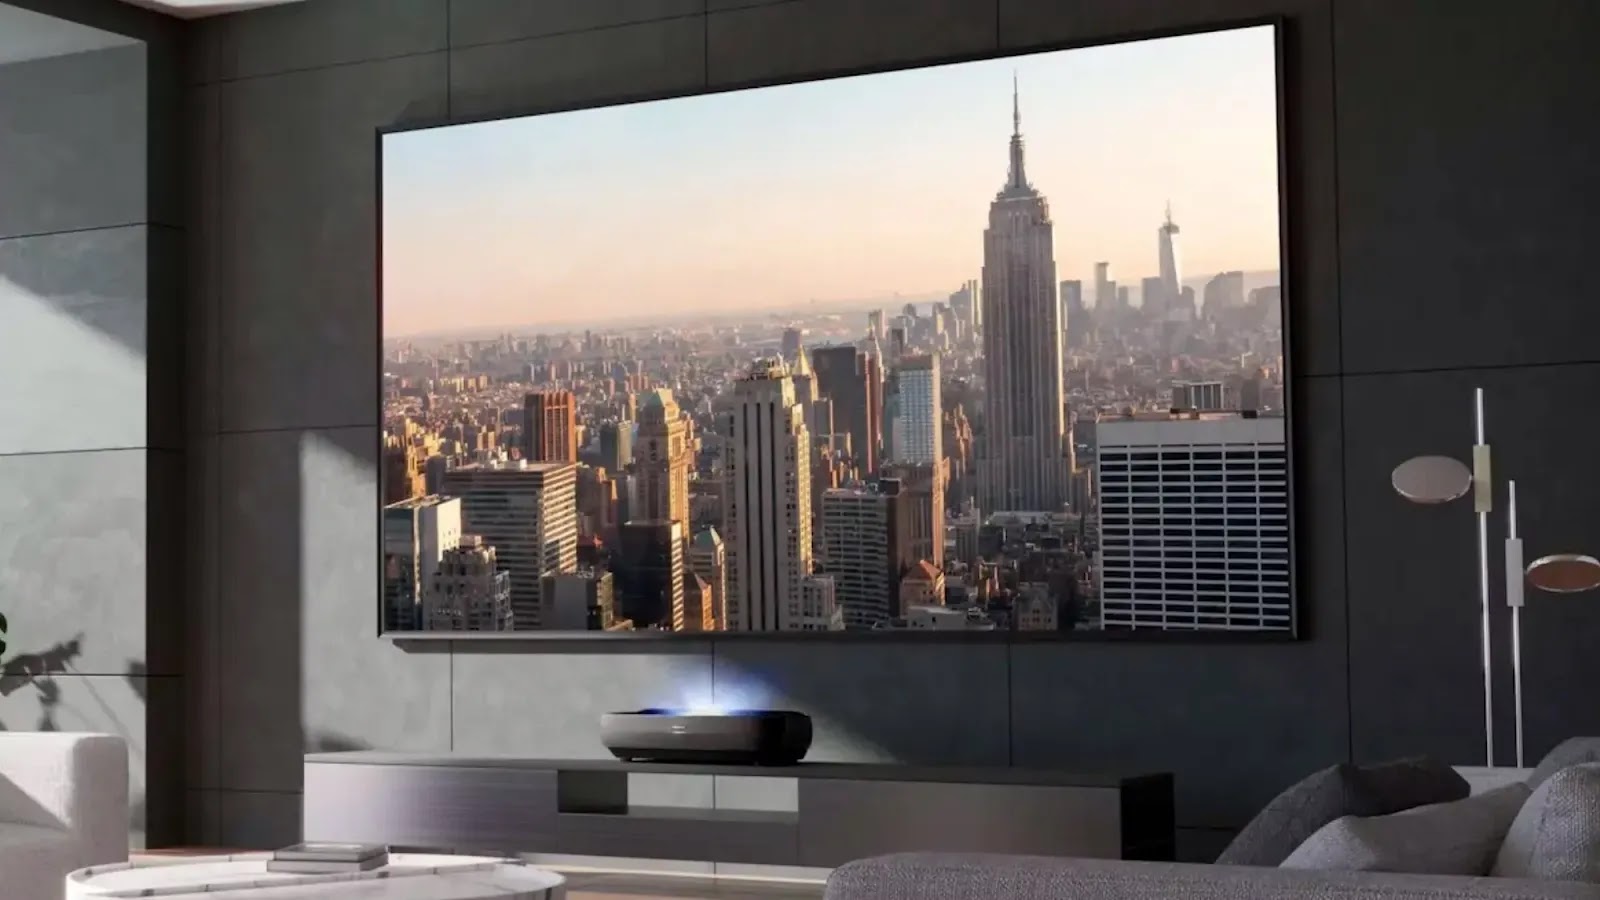 Hisenses 85-inch ULED X QLED TV and 100-inch 4K Laser Projector A Glimpse into the Future of Home Entertainment